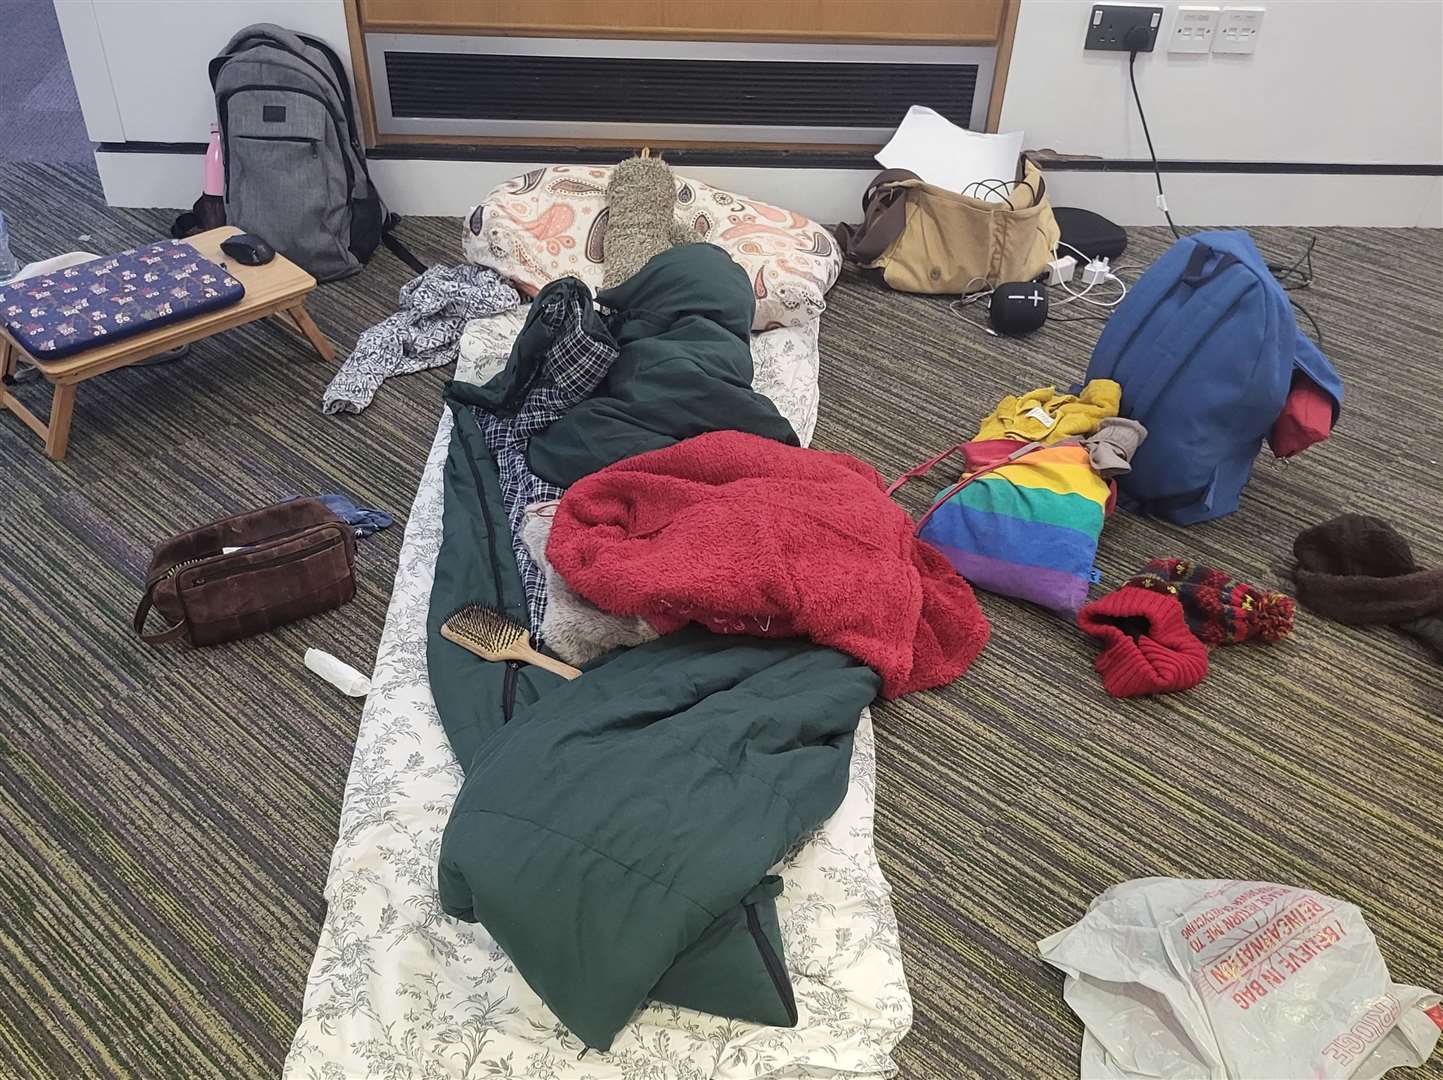 About 15 students have been sleeping at the University of Kent's Grimond Building in Canterbury since Thursday. Picture: Samantha Bilkus